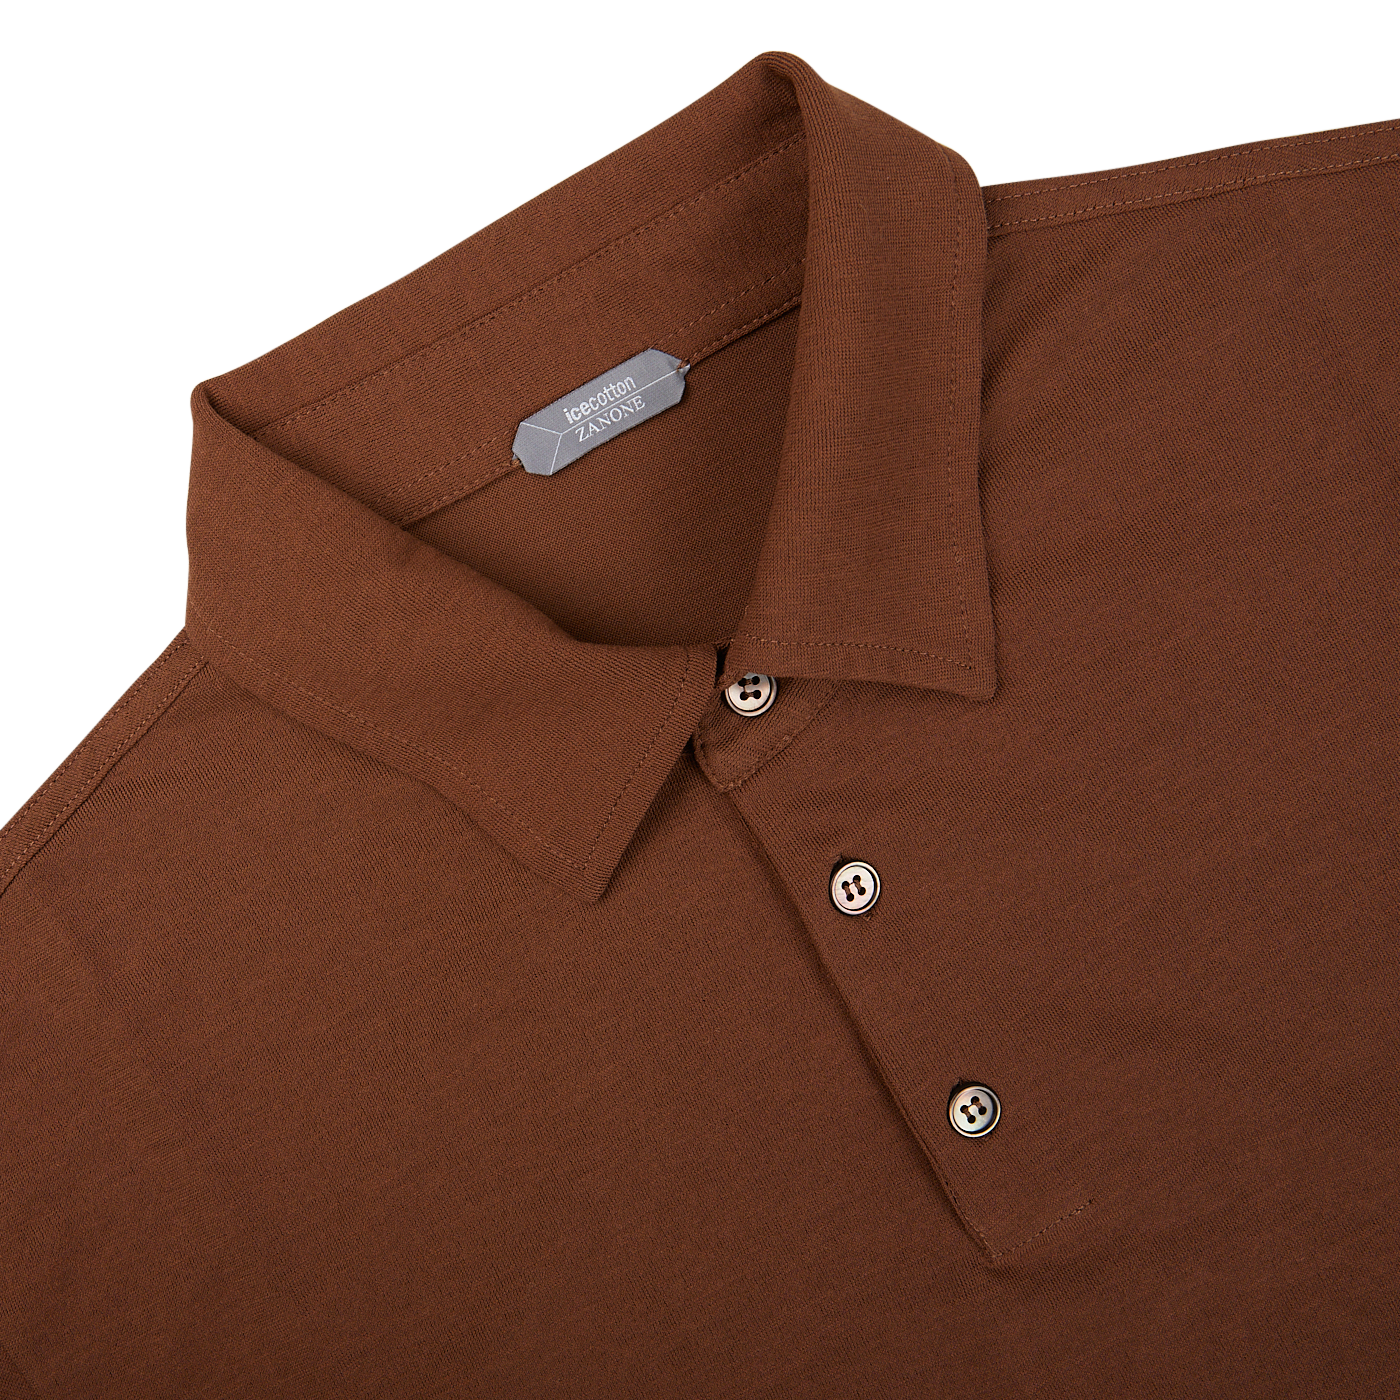 A Zanone Coffee Brown Ice Cotton Polo Shirt with buttons on the collar.